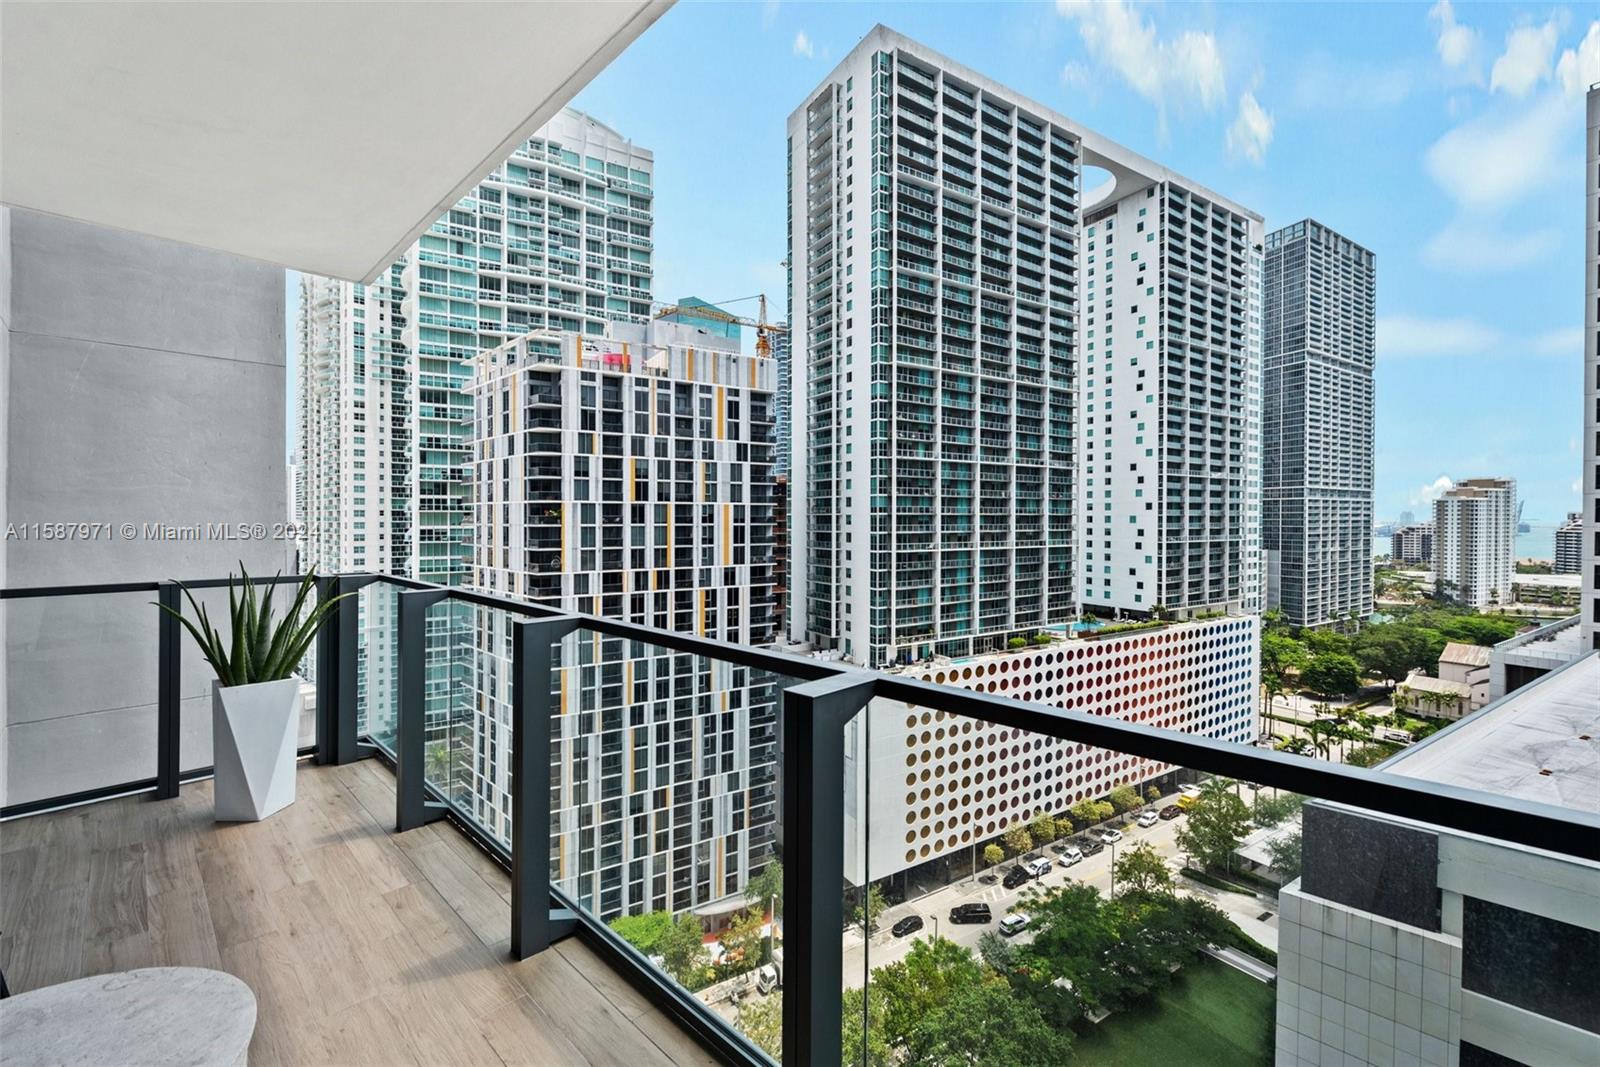 Enjoy living in exclusive Reach at Brickell City Center! Modern spacious 1 bedrooms 1.5 baths unit, large balcony with panoramic city skyline view, 11 feet ceilings, natural stone floors throughout, Italian kitchen cabinets, top of the line appliances, quartz countertops, wine bottle storage, elegant bathrooms with soaking tubs and frameless glass enclosed showers, impact doors and windows. 5 stars building amenities include full gym & SPA, heated pool, Jacuzzis, BBQ area, children play area, business center, 24-hours concierge, valet service. Unit is tenant occupied until Oct 2024, paying $4,200.00/ Month